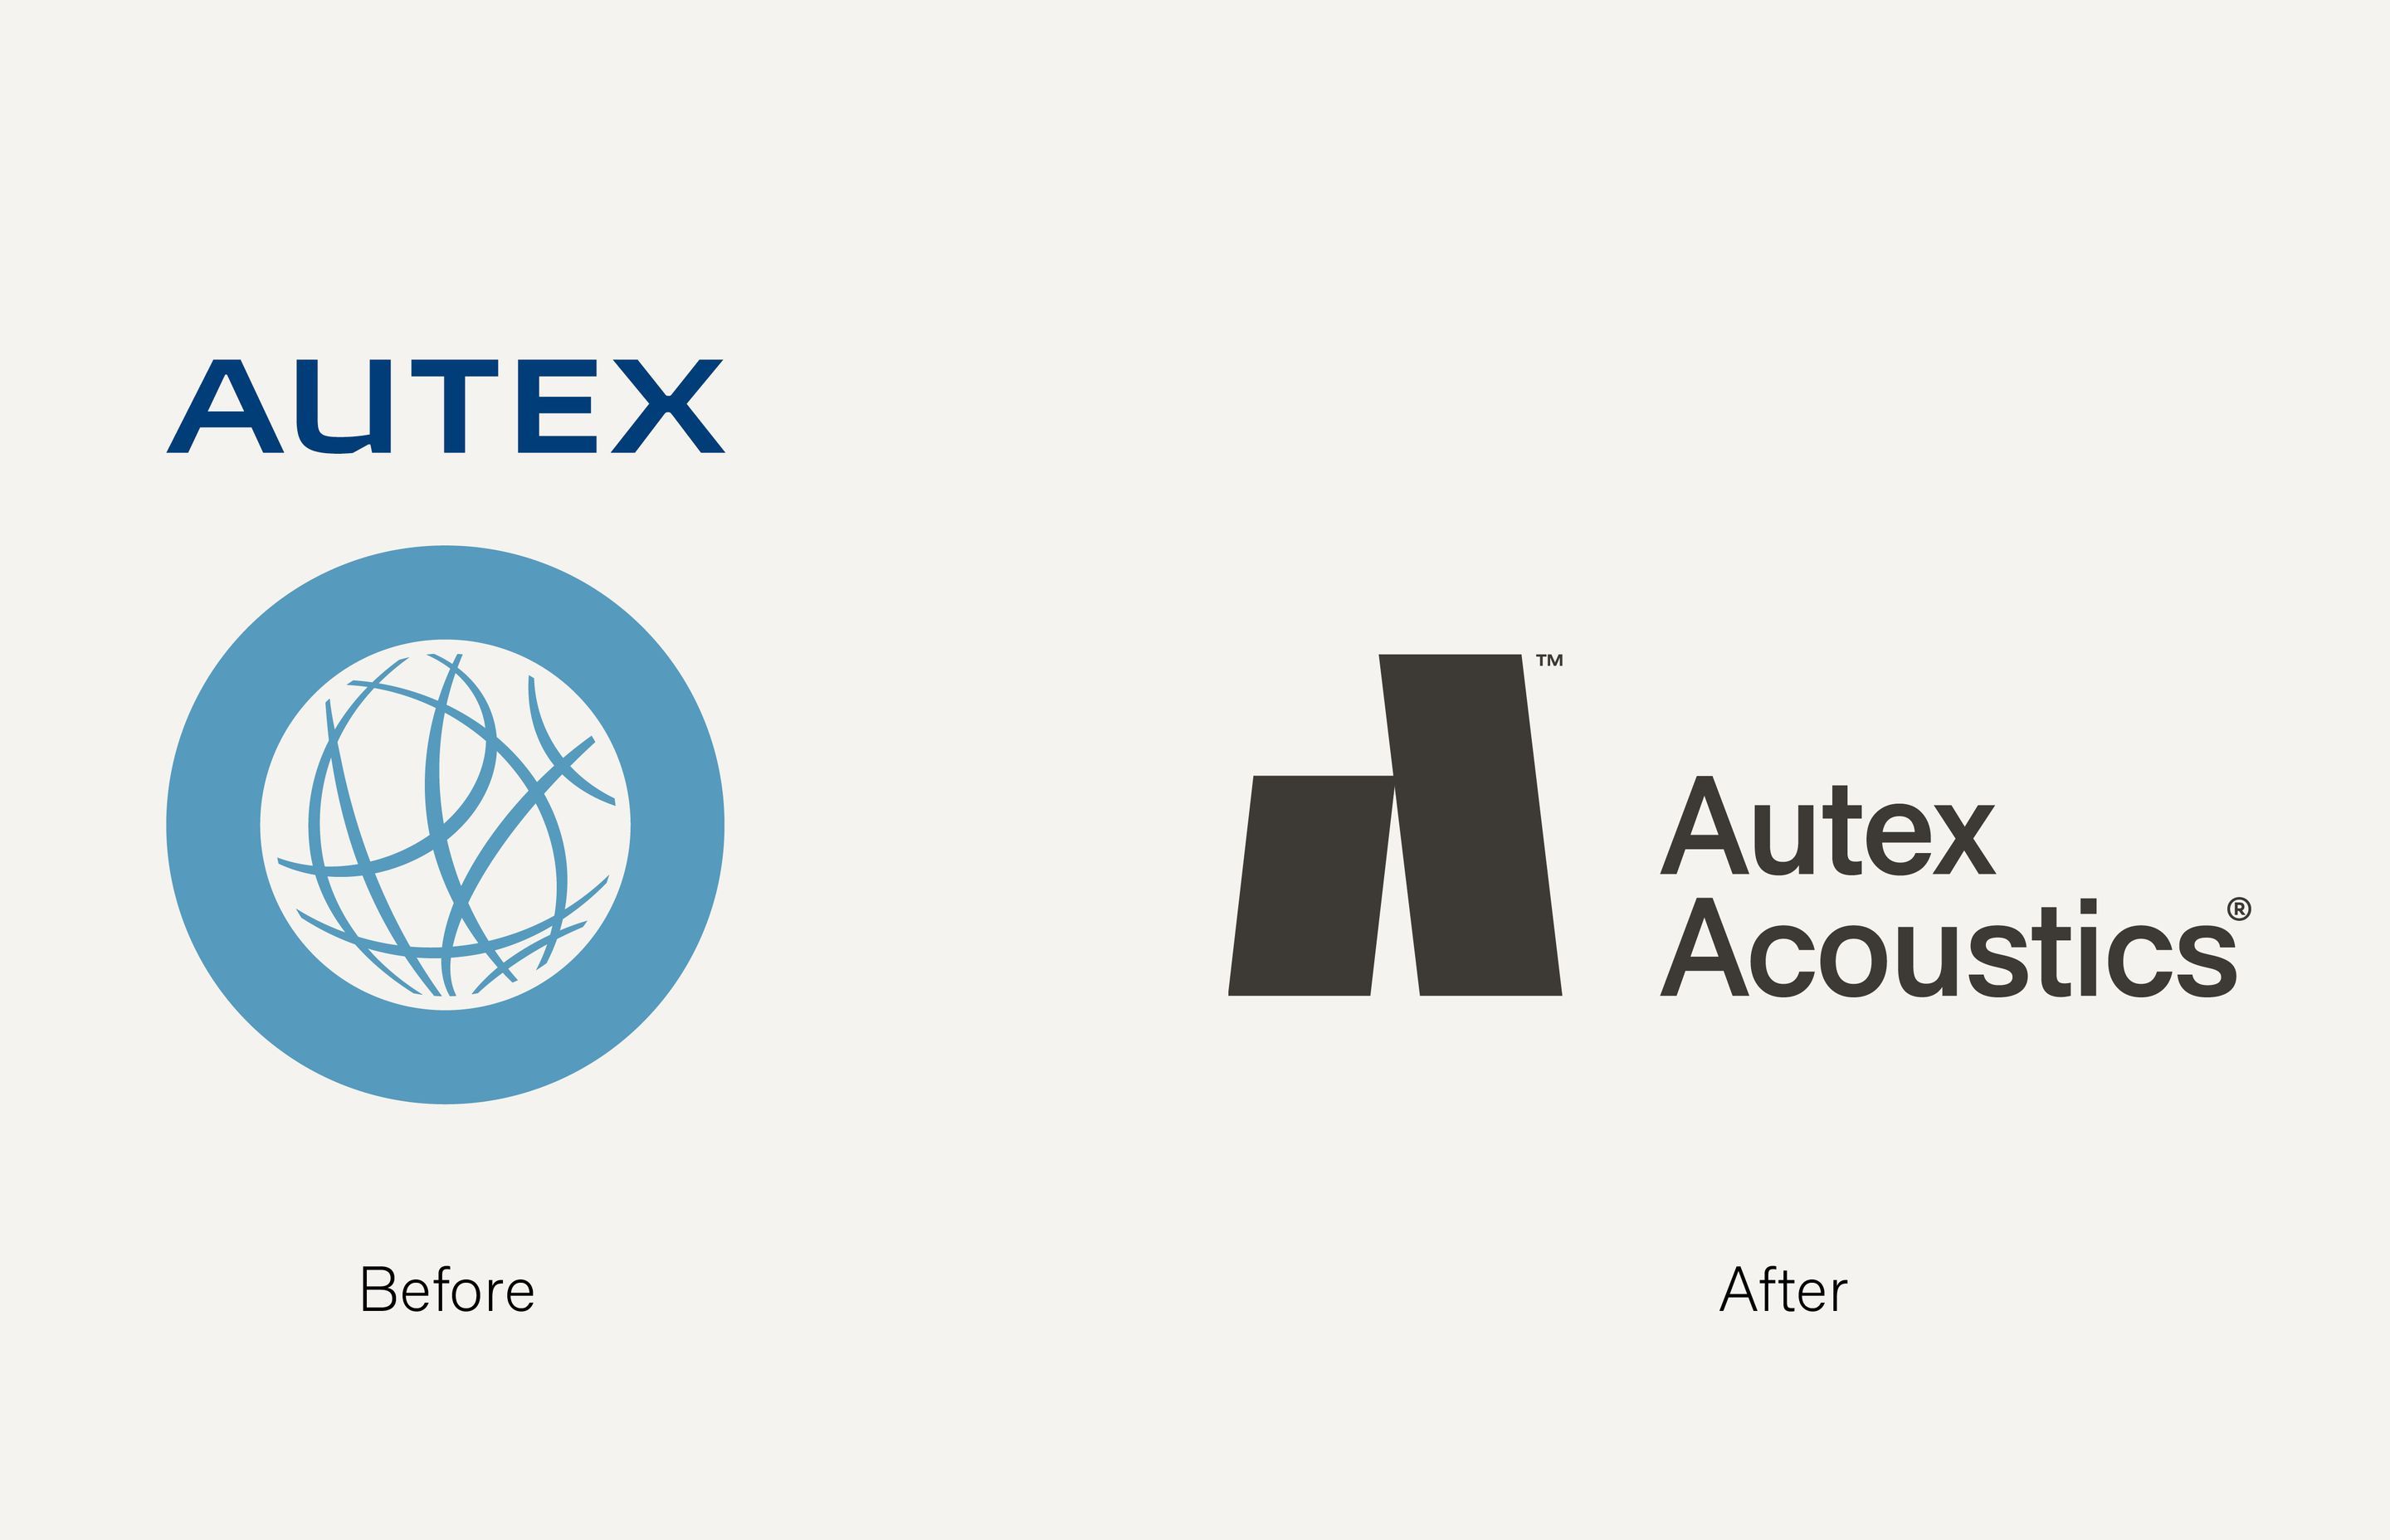 The new Autex Acoustics logo is the first time the company has rebranded the acoustics division in its 50-year history, positioning itself to better reflect its involvement in the field of architectural acoustic solutions.